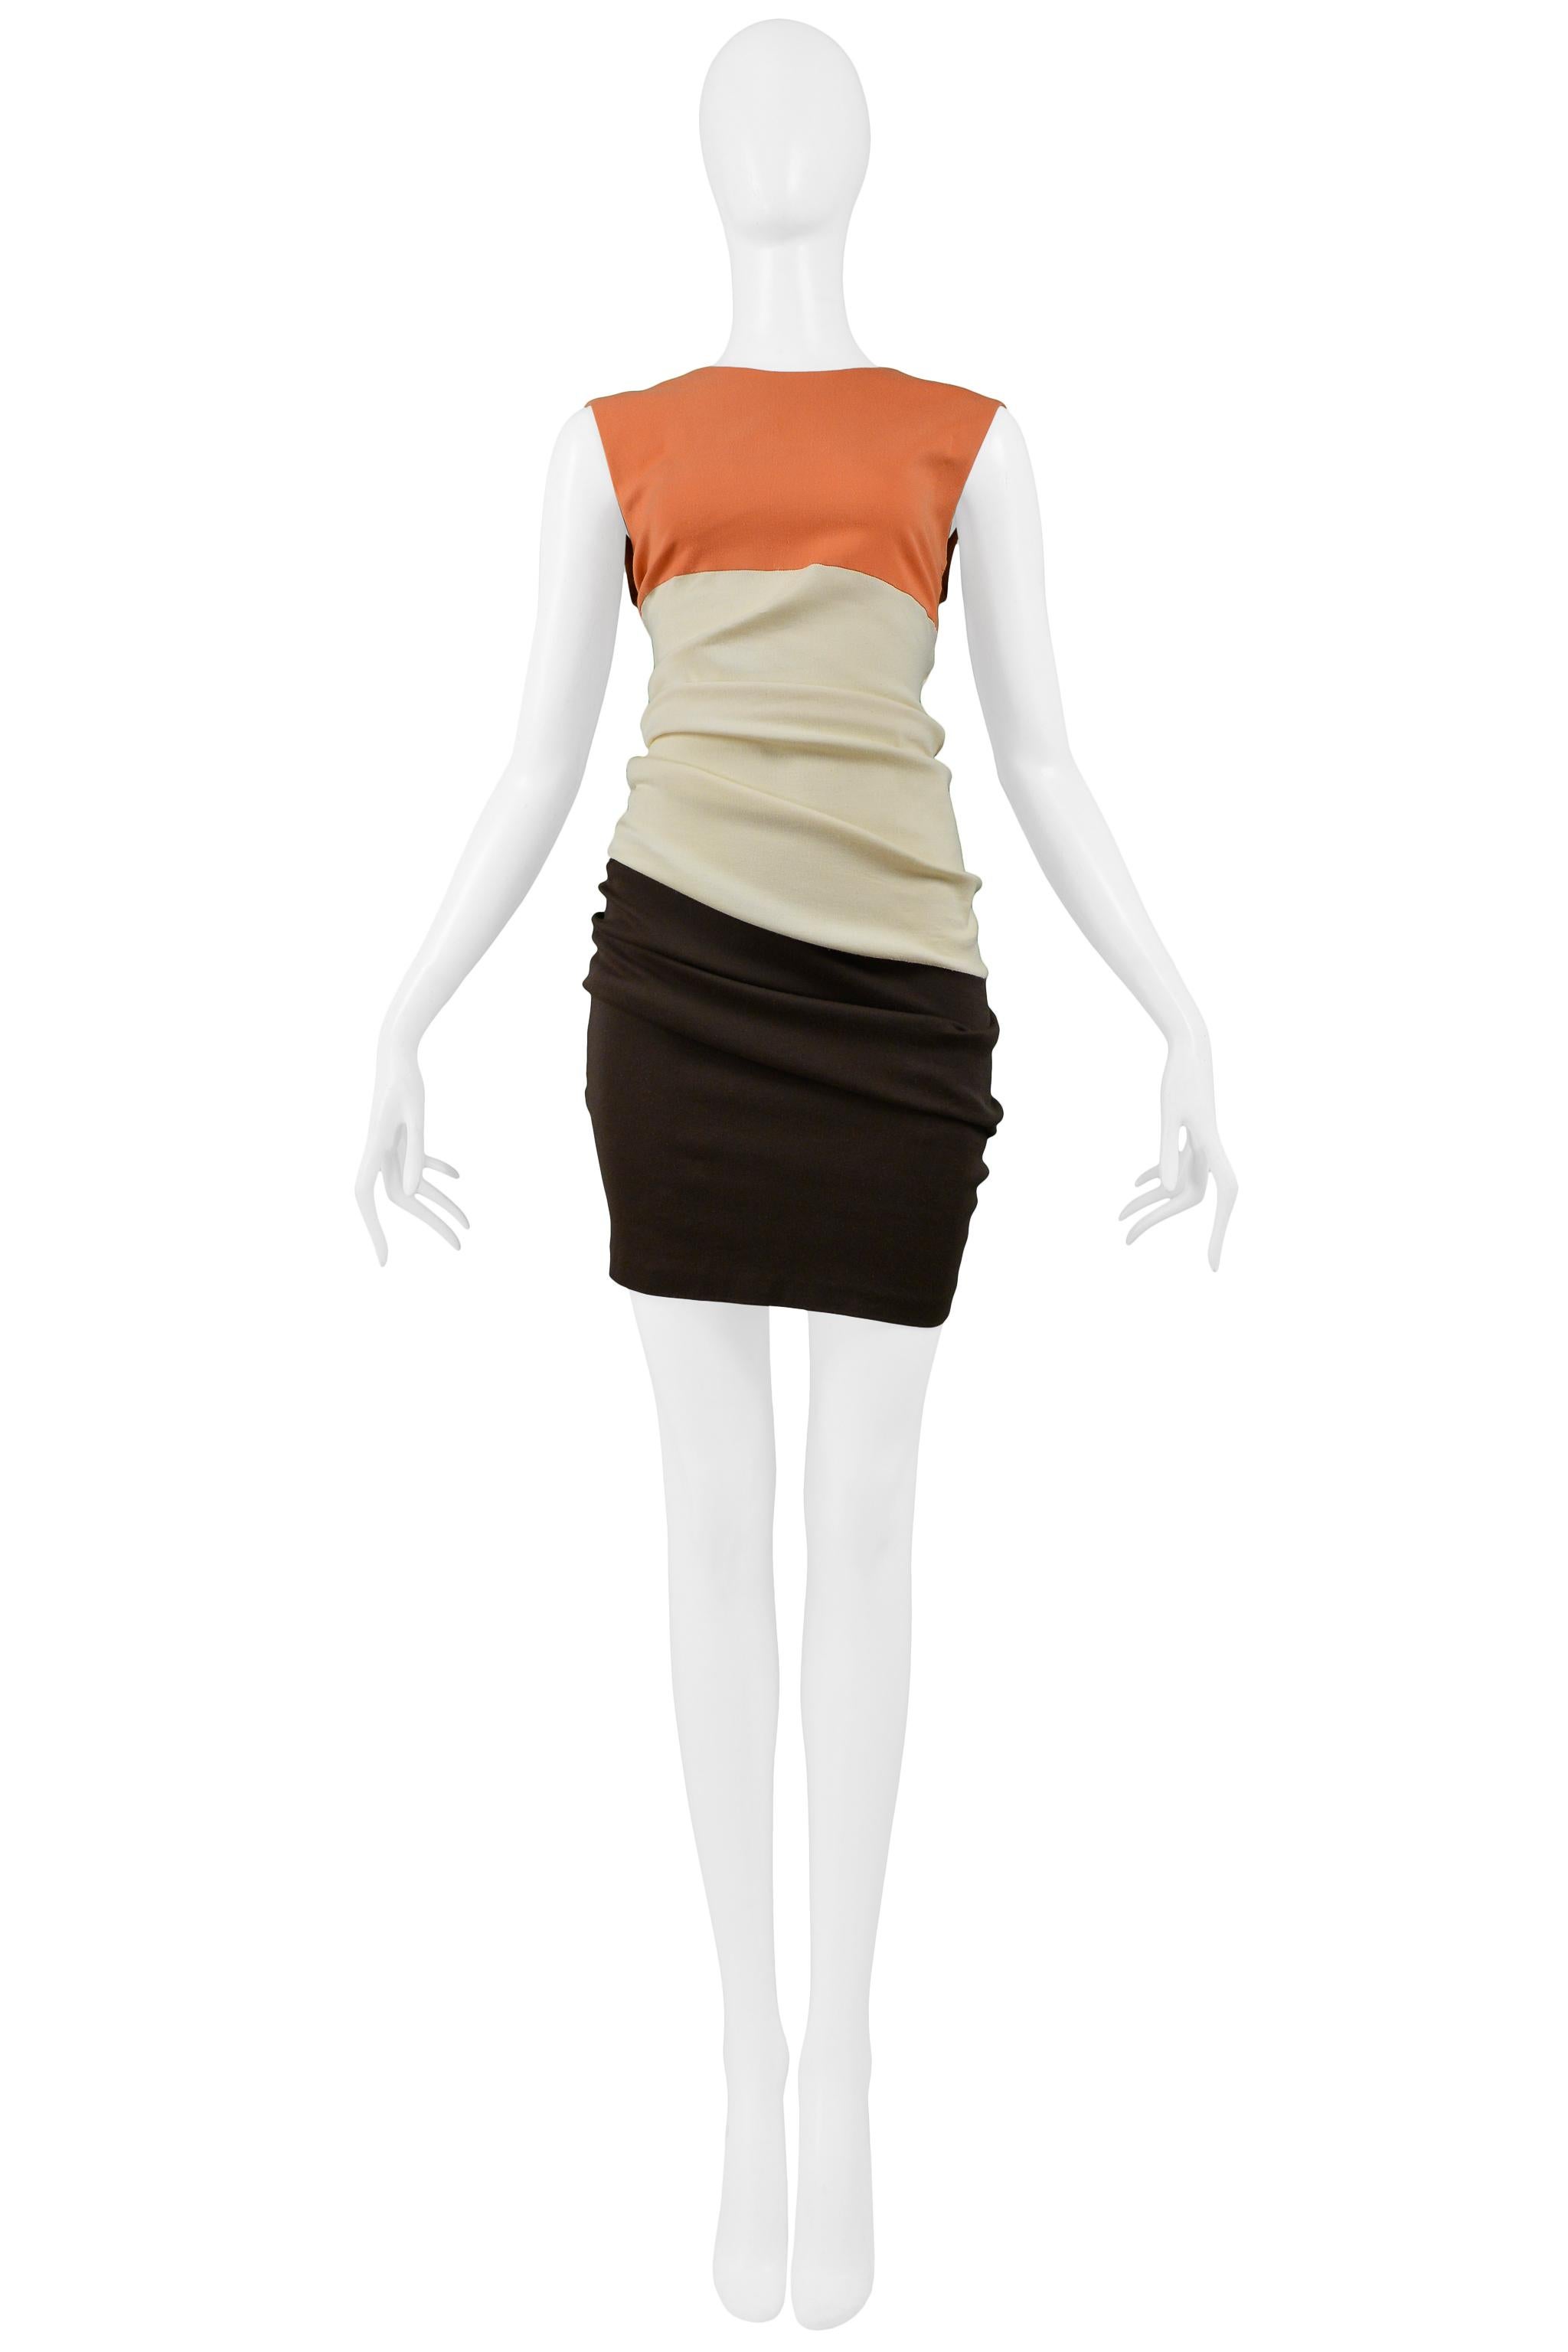 Helmut Lang Coral Ivory & Brown Color Block Knit Dress 1990 In Excellent Condition For Sale In Los Angeles, CA